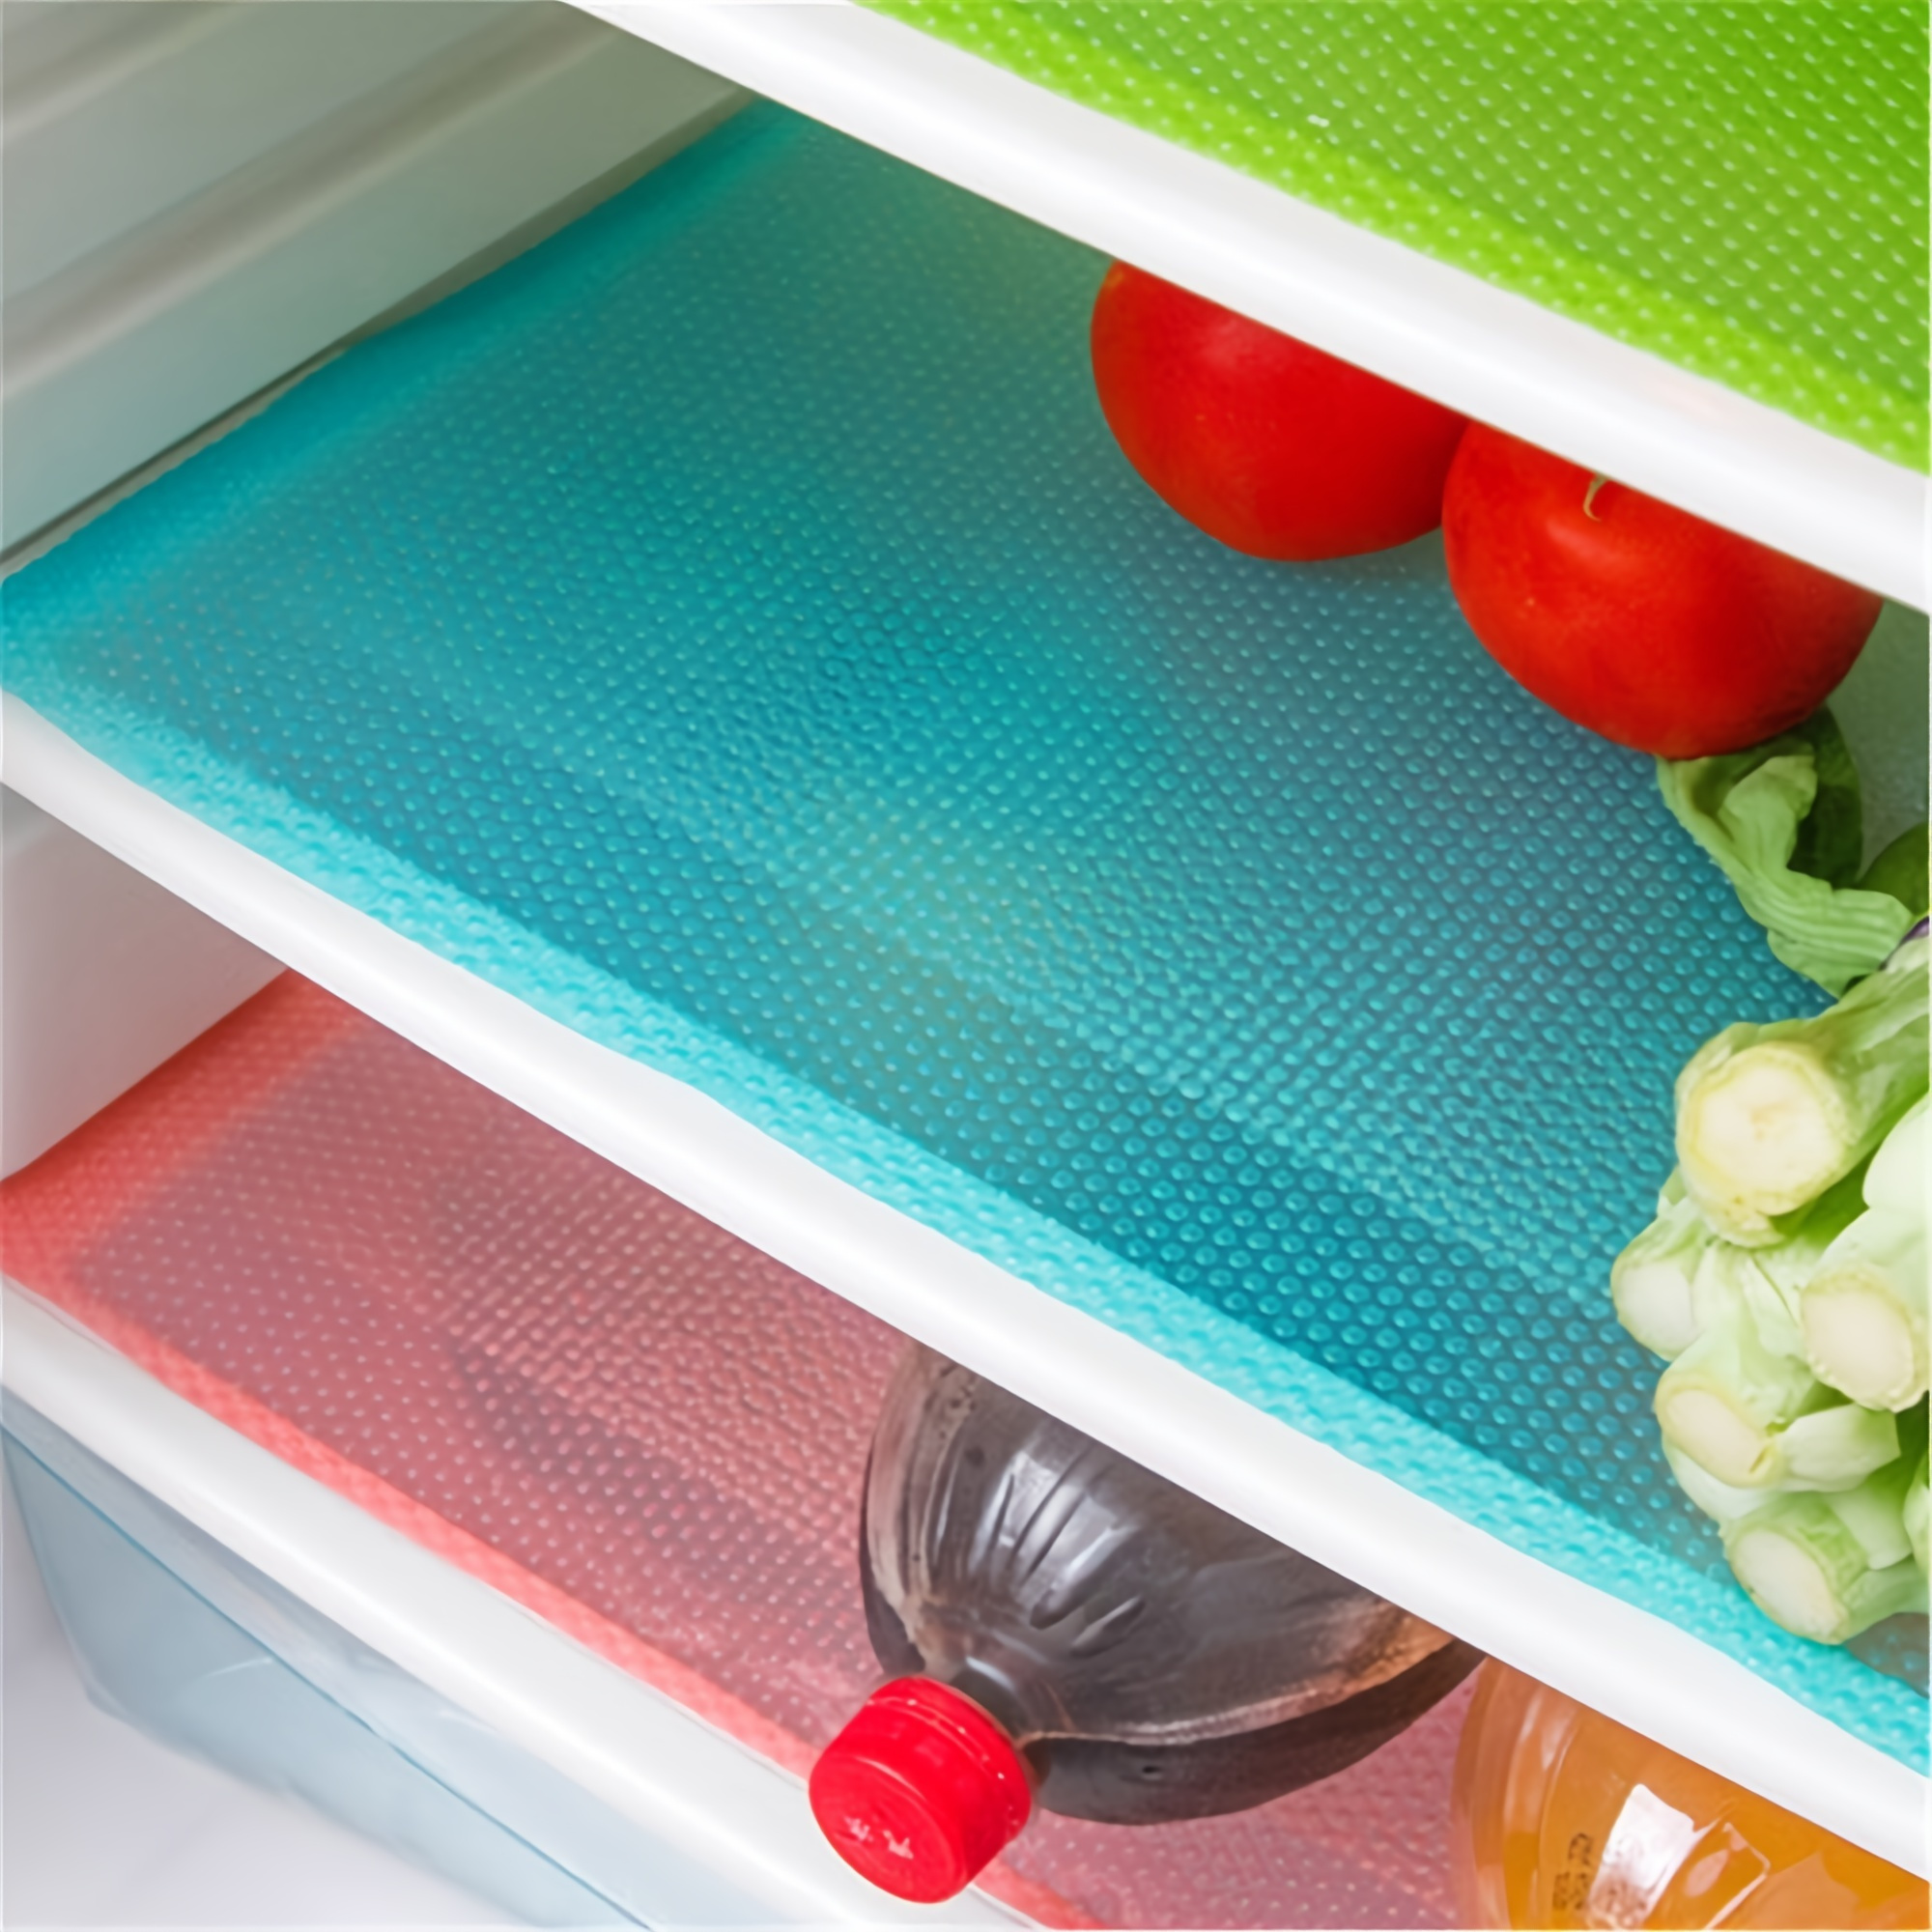 

4pcs Refrigerator Liners Mats Washable, Refrigerator Mats Liner Waterproof Oilproof, Fridge Liners For Shelves, Cover Pads For Freezer Glass Shelf Cupboard Cabinet Drawer